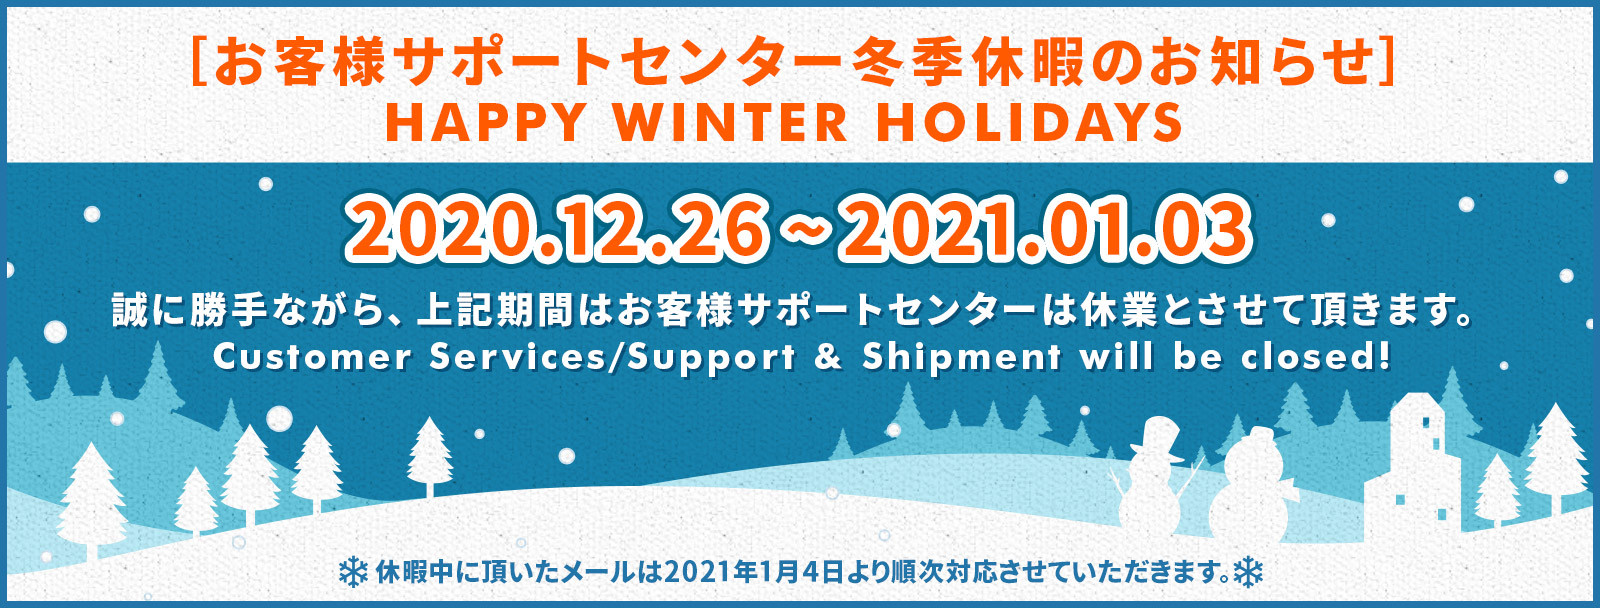 Winter Holiday Announcement 2020-2021